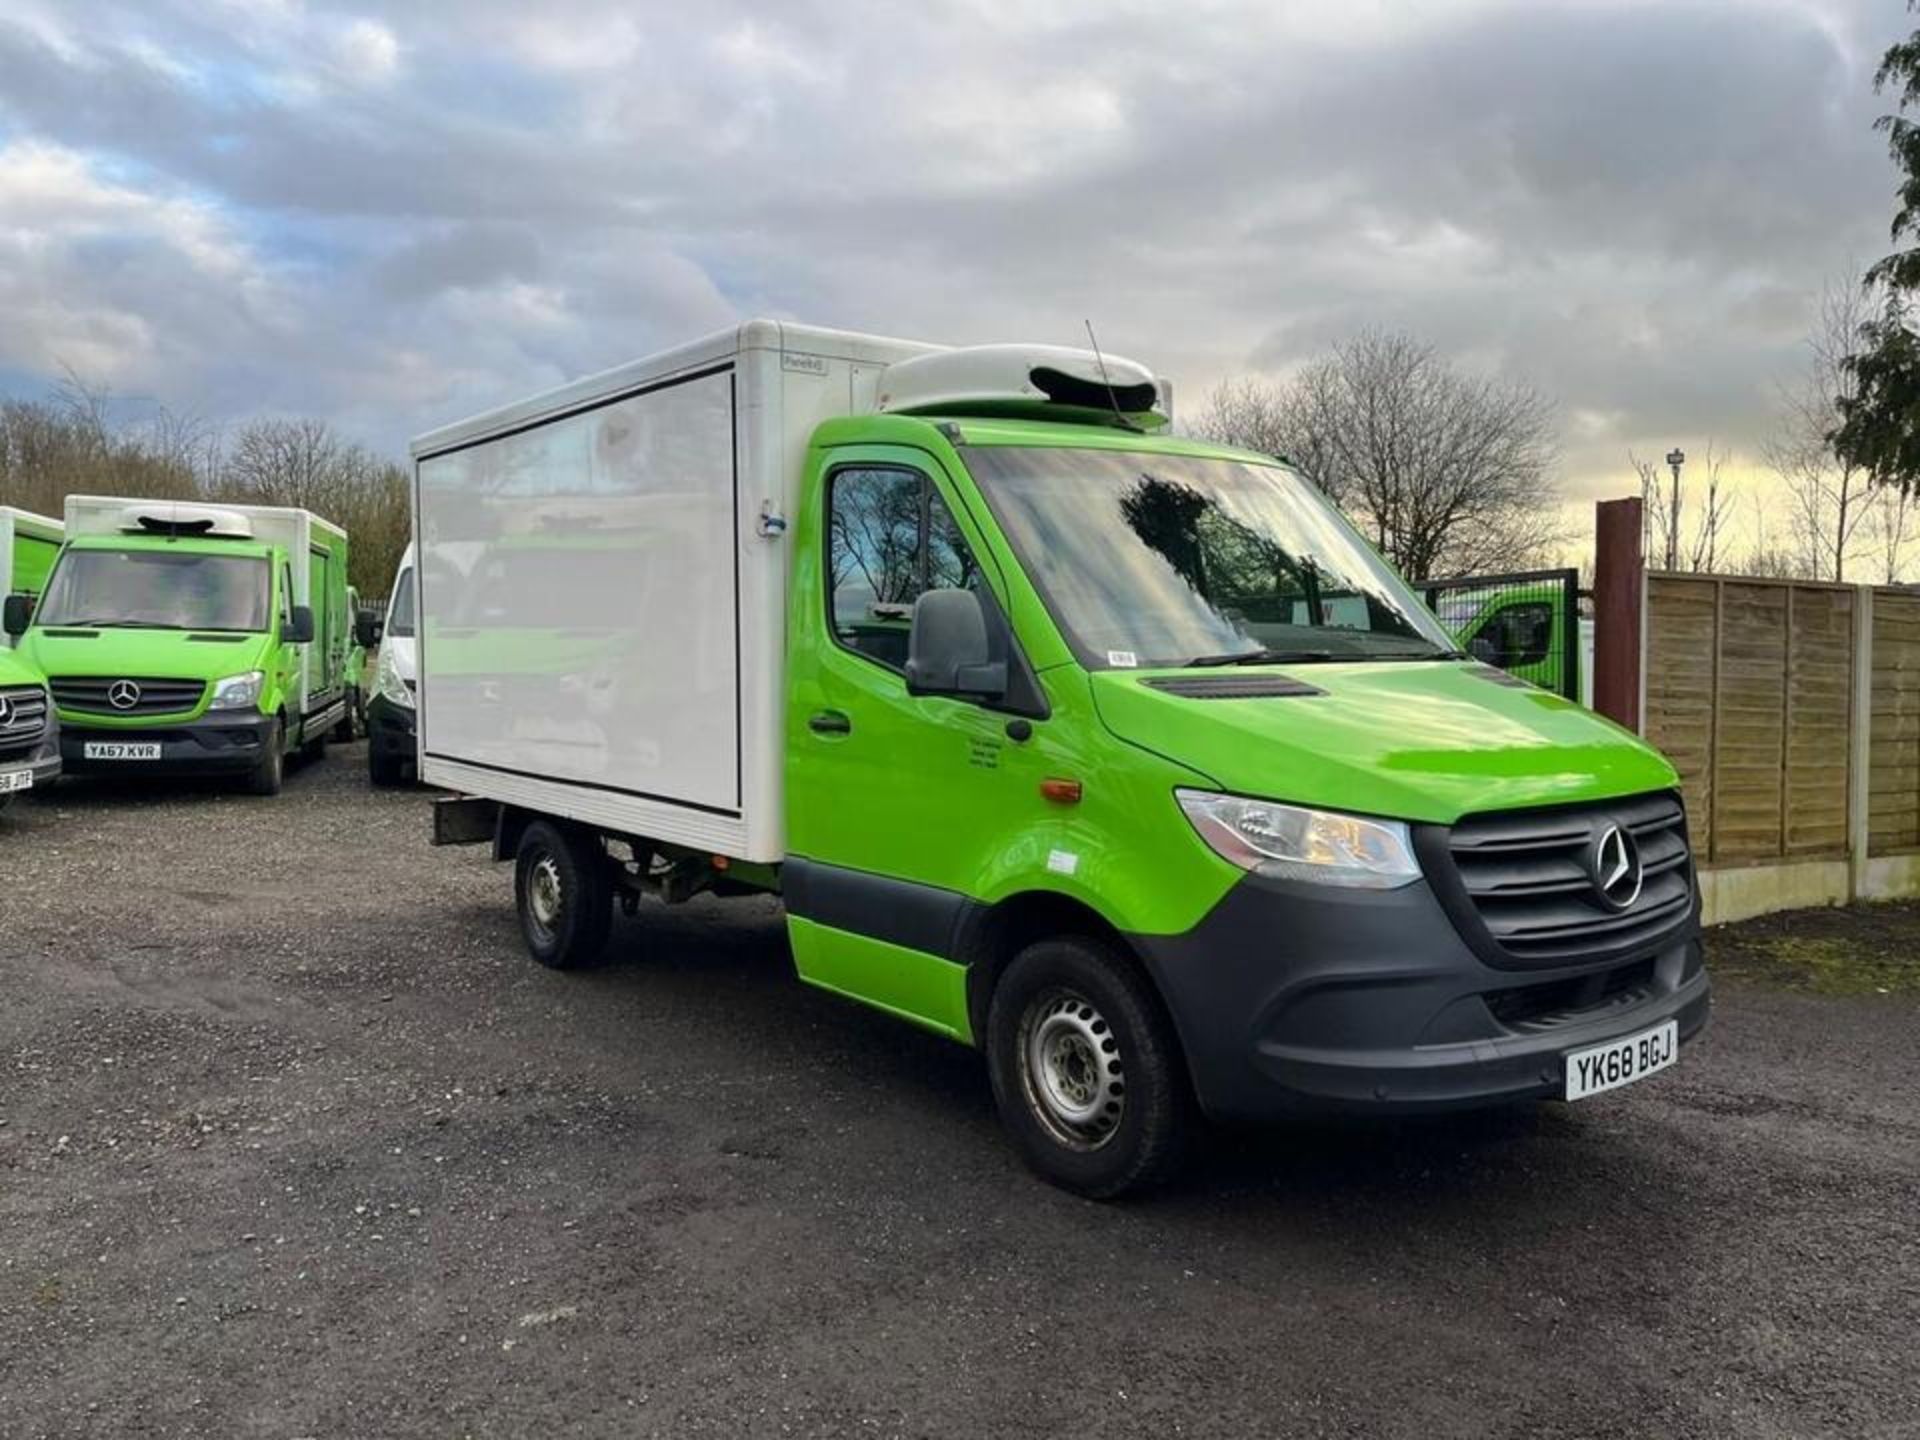 >>>SPECIAL CLEARANCE<<< 2019 MERCEDES-BENZ SPRINTER 314 CDI 35T RWD L2H1 FRIDGE FREEZER CHASSIS CAB